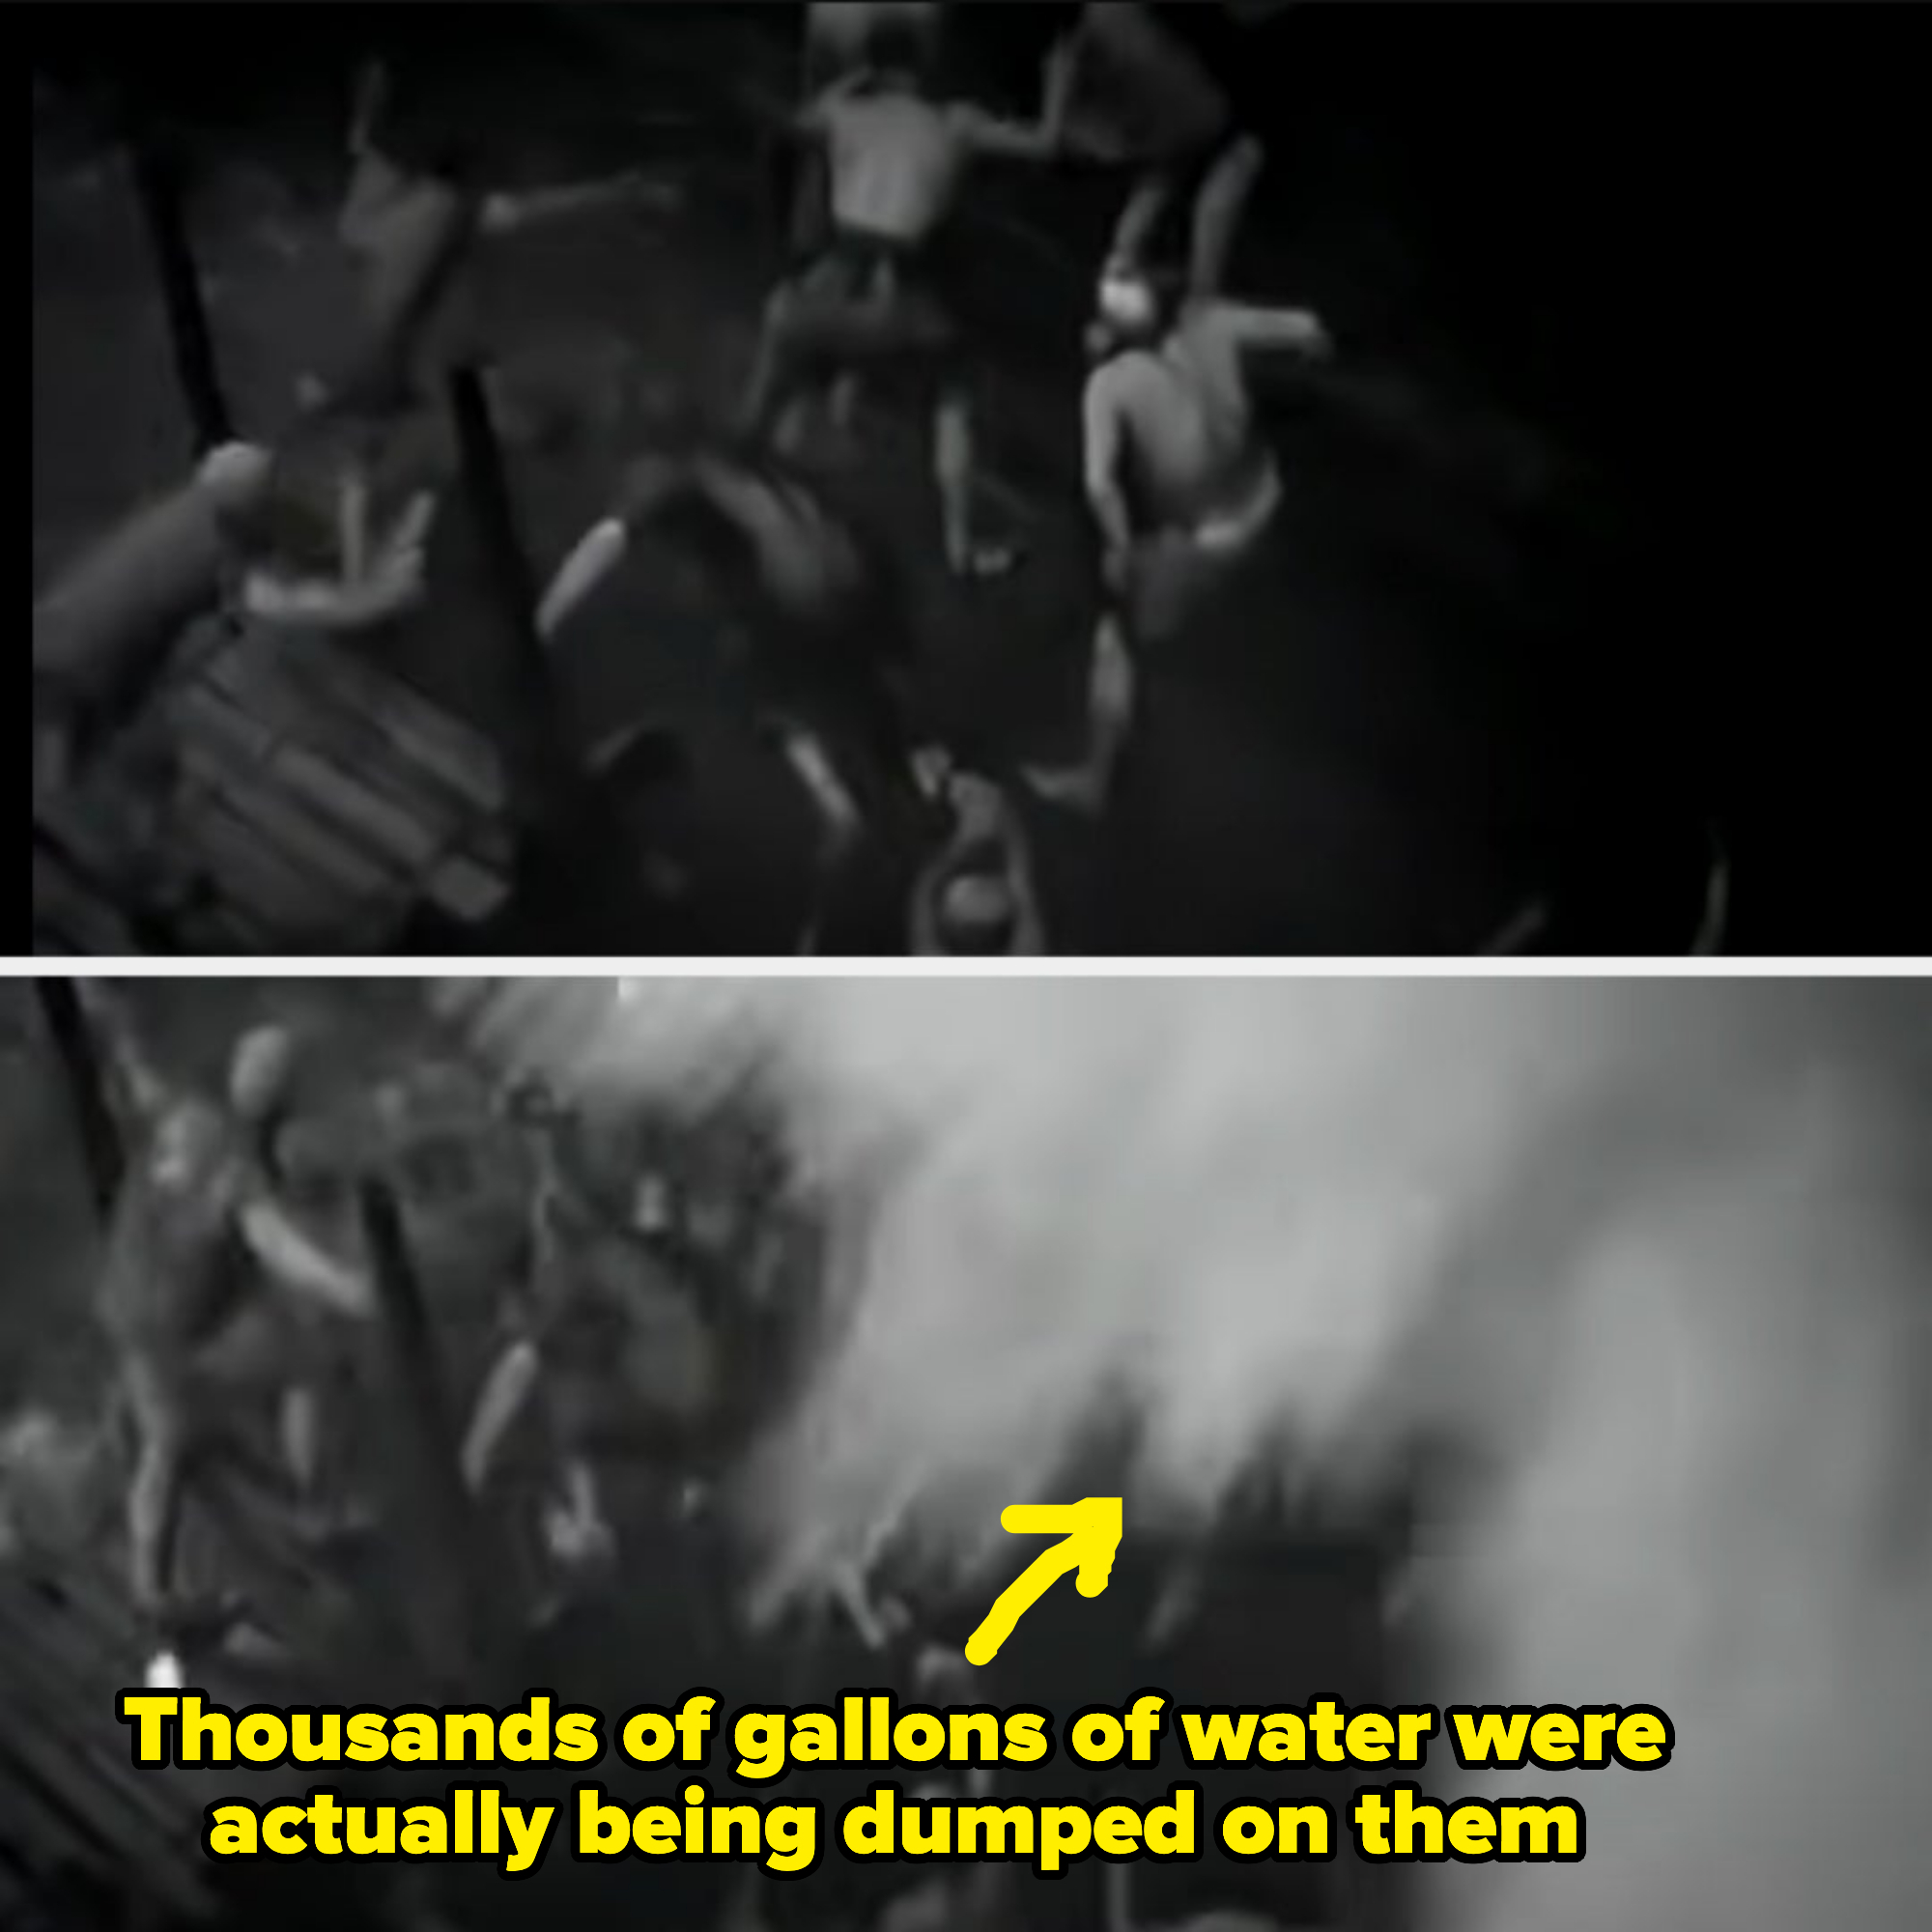 Arrow pointing to thousands of gallons of water being dumped on the actors in the scene